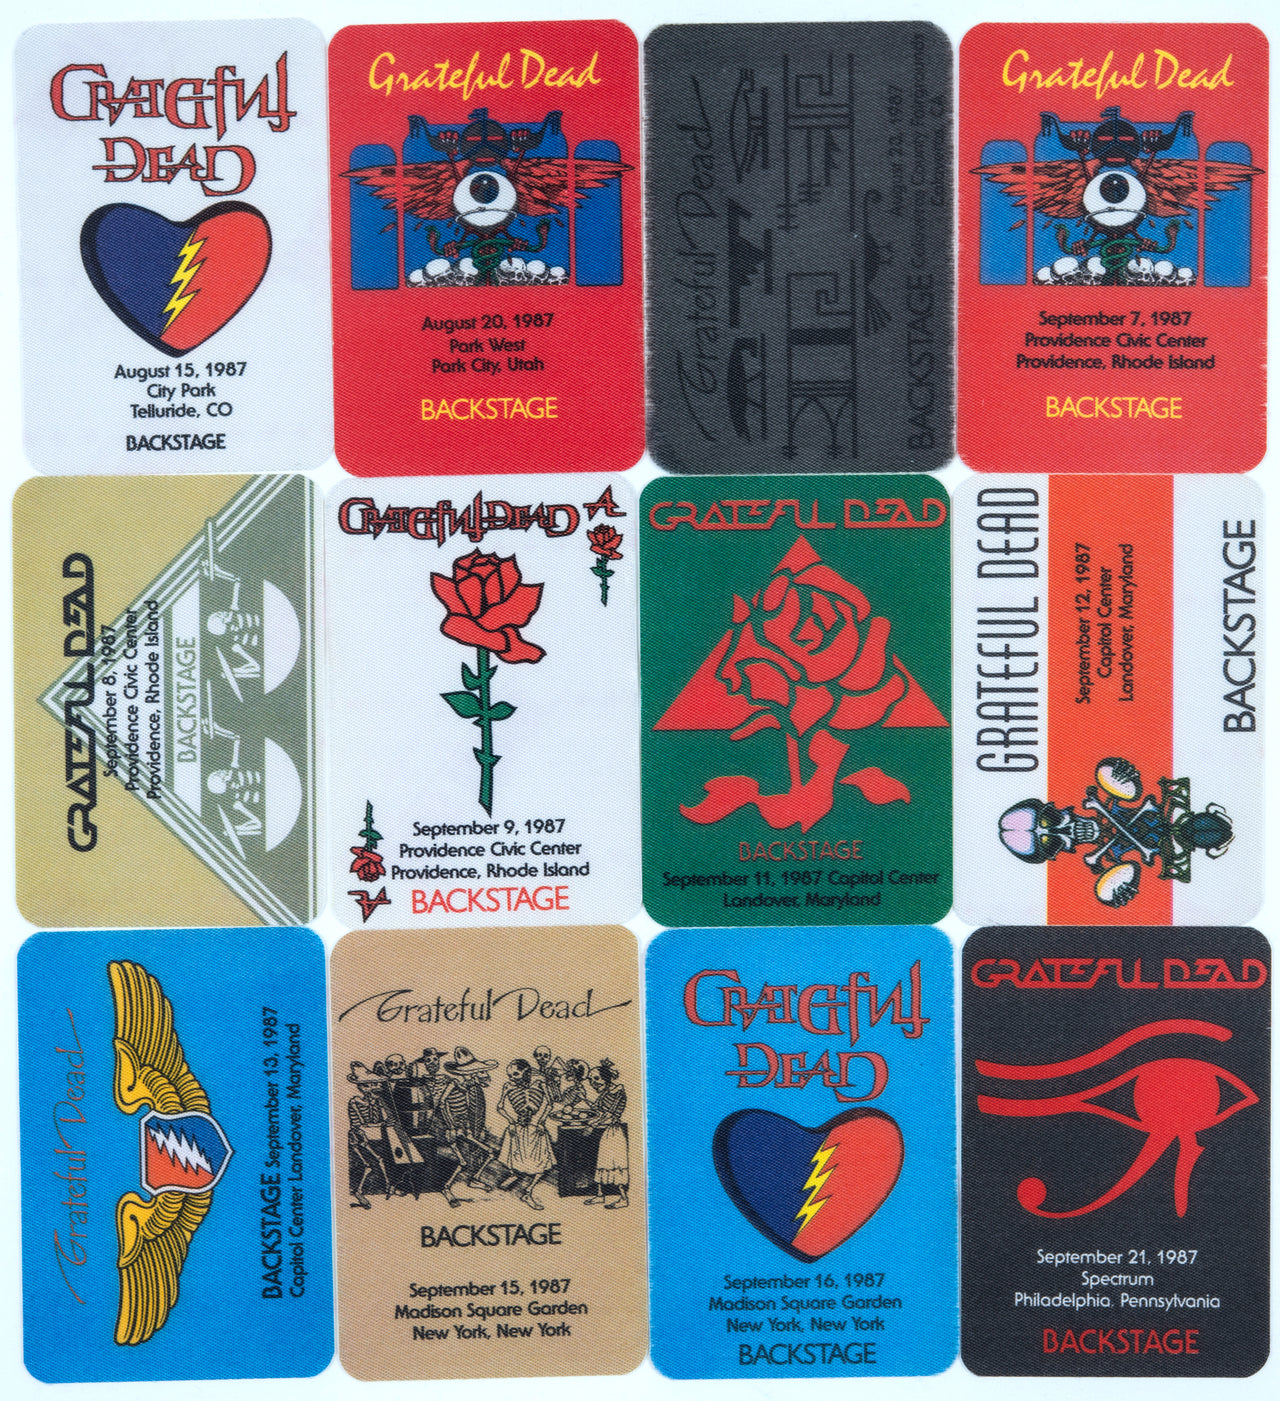 Grateful Dead Backstage Passes (8/15/1987 - 9/21/1987) from Dan Healy